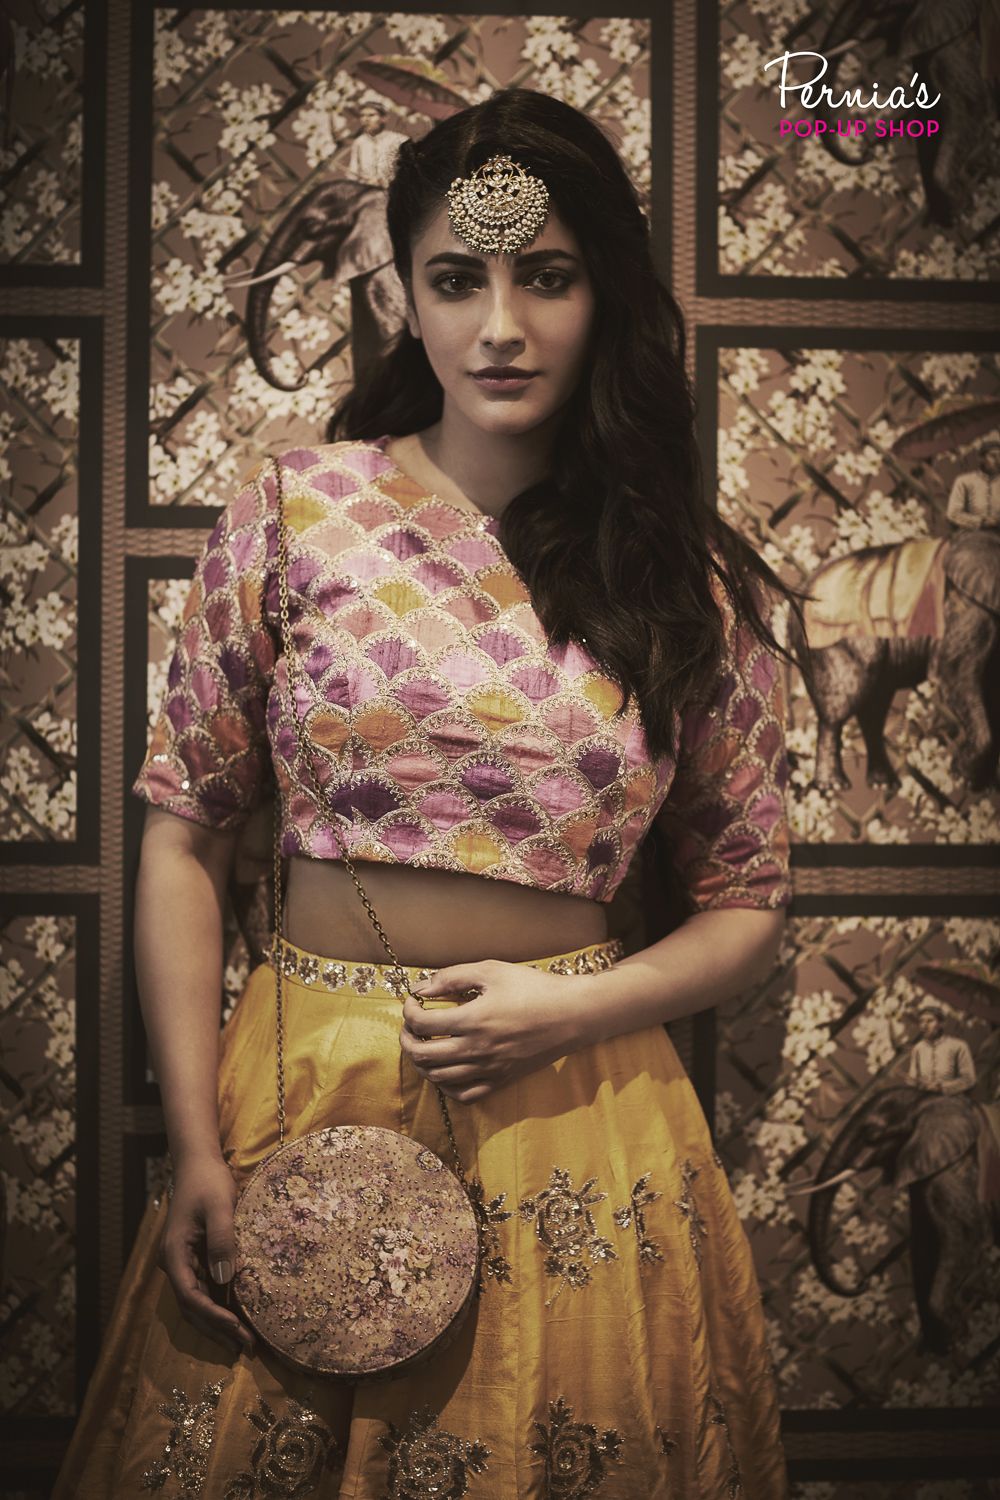 Photo From Runaway Bride- Shruti Hasan for The Magazine  - By Pernia's Pop-Up Shop